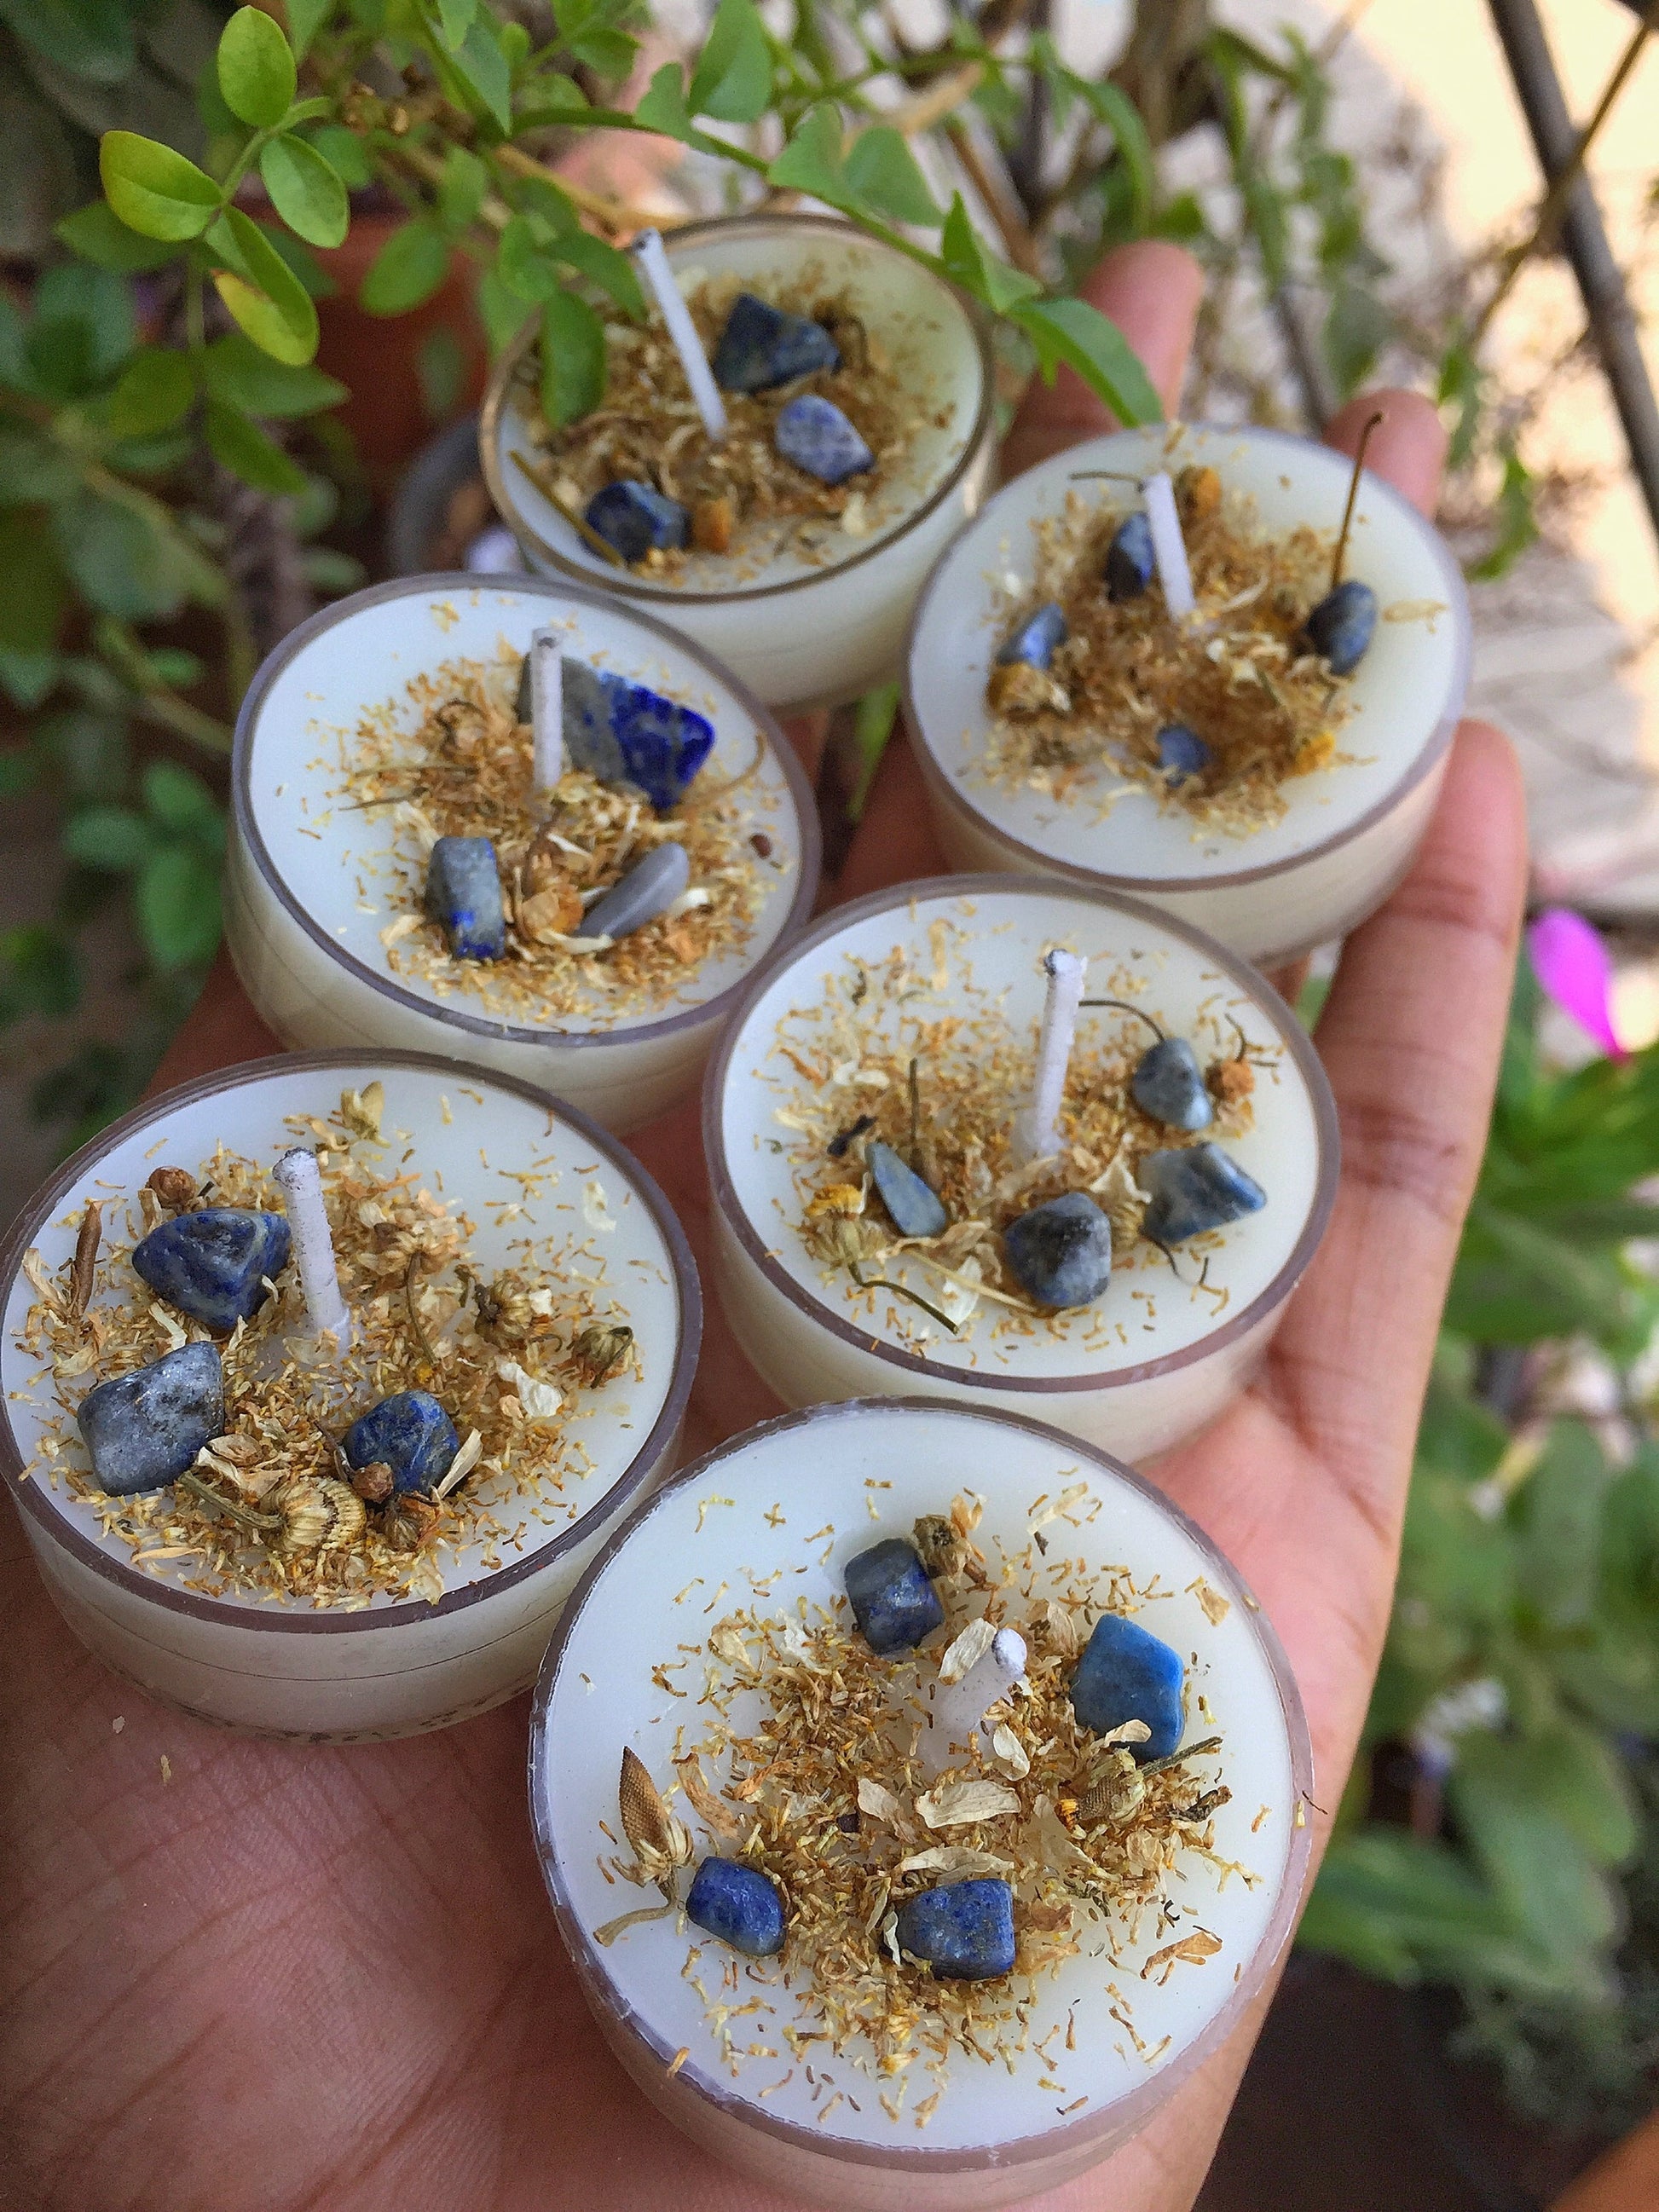 Scented Tea Light Candles Set Of 8 - Infused With Chamomile And Lapiz Lazuli Candle